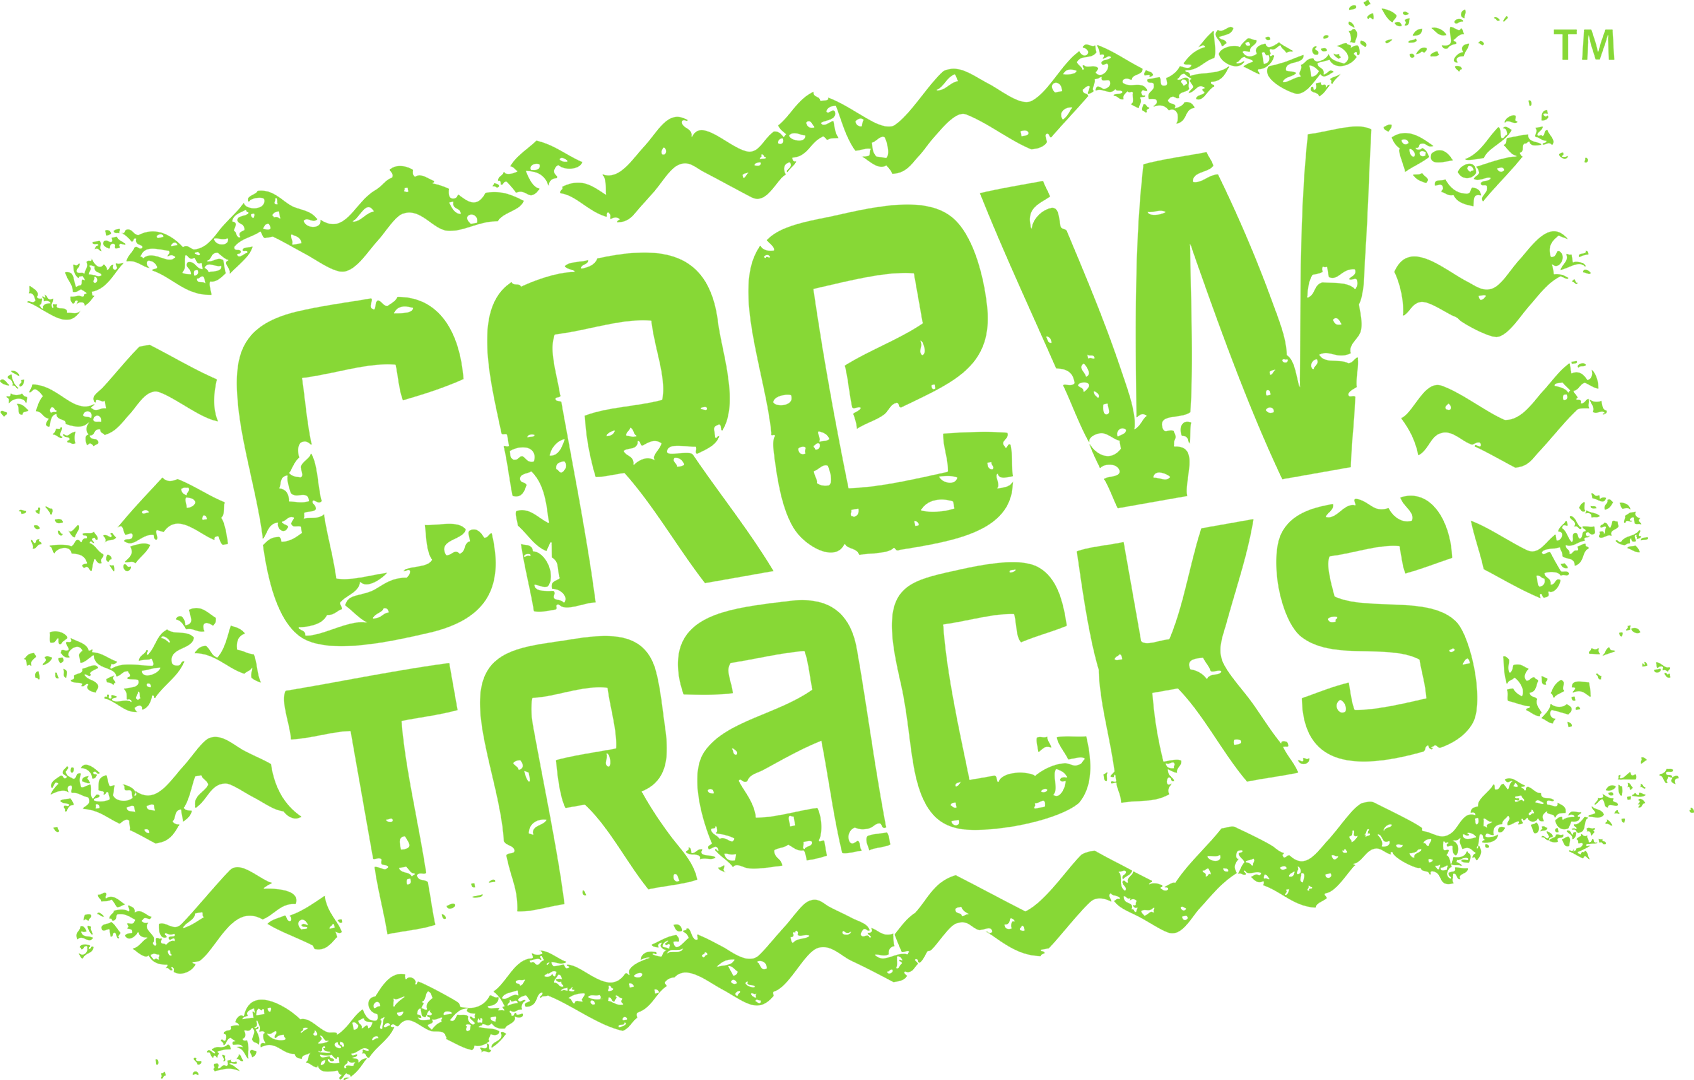 The logo for crew tracks is green and has a white background.